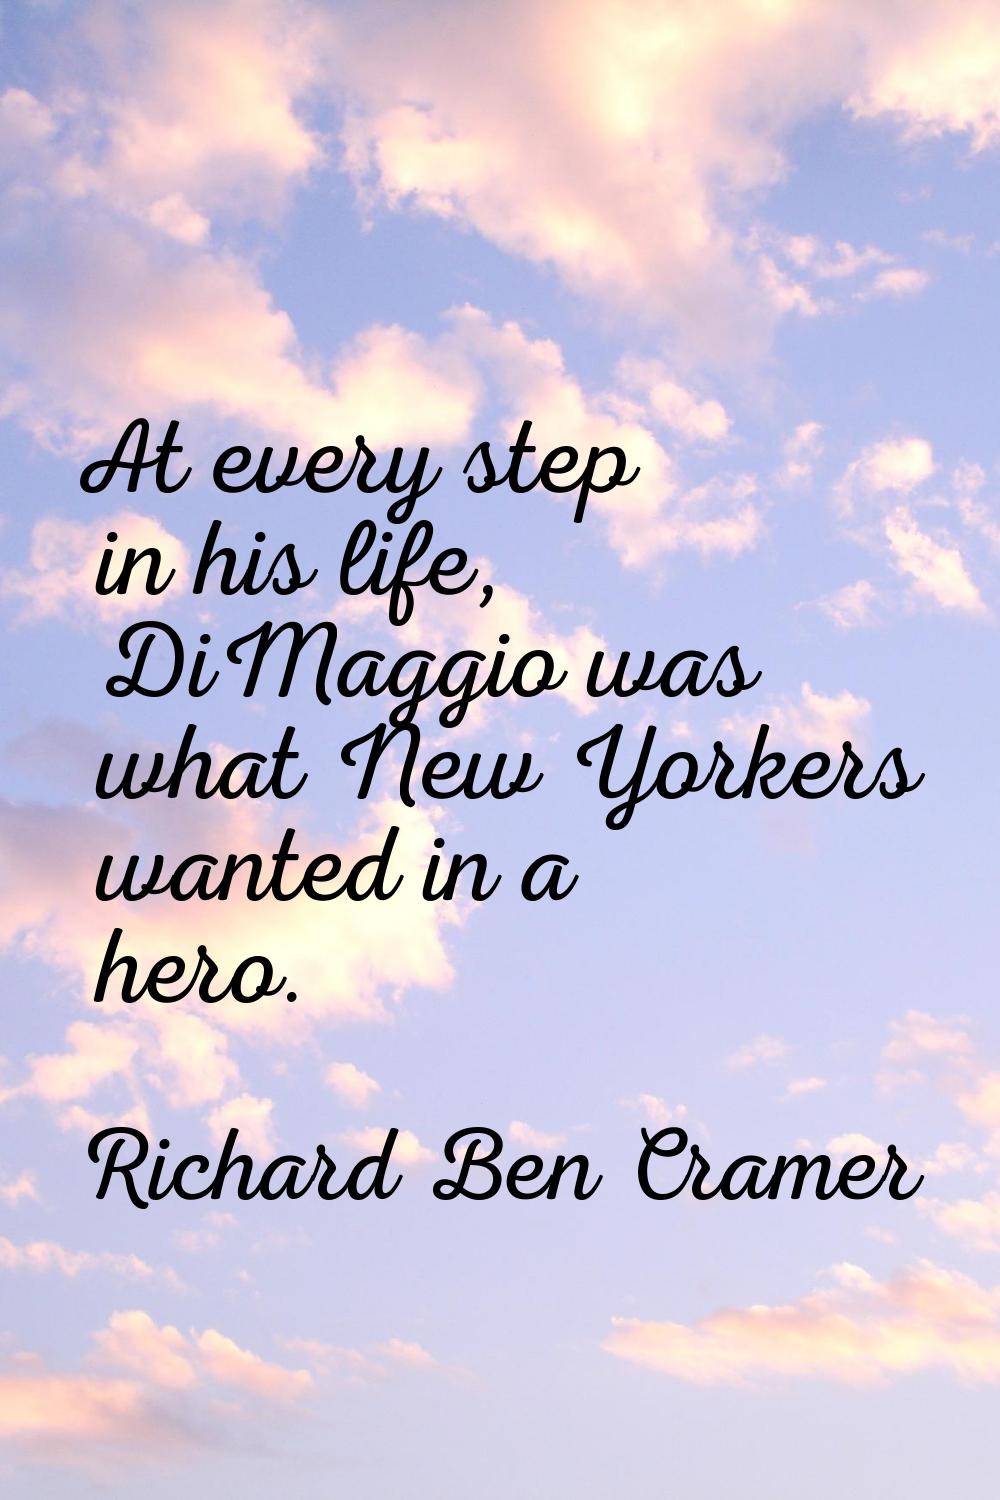 At every step in his life, DiMaggio was what New Yorkers wanted in a hero.